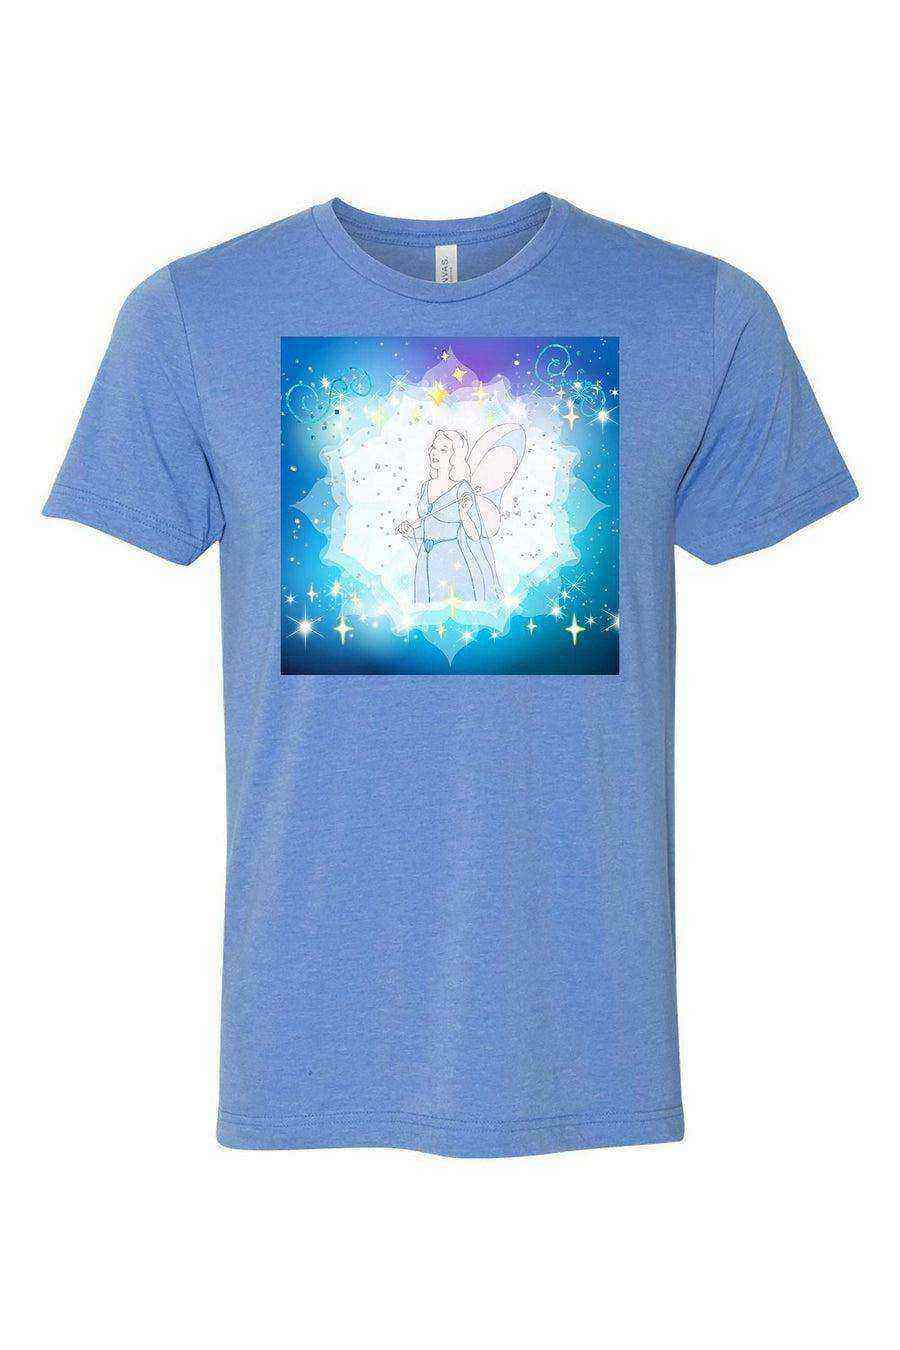 Blue Fairy Shirt | When You Wish Upon A Star - Dylan's Tees